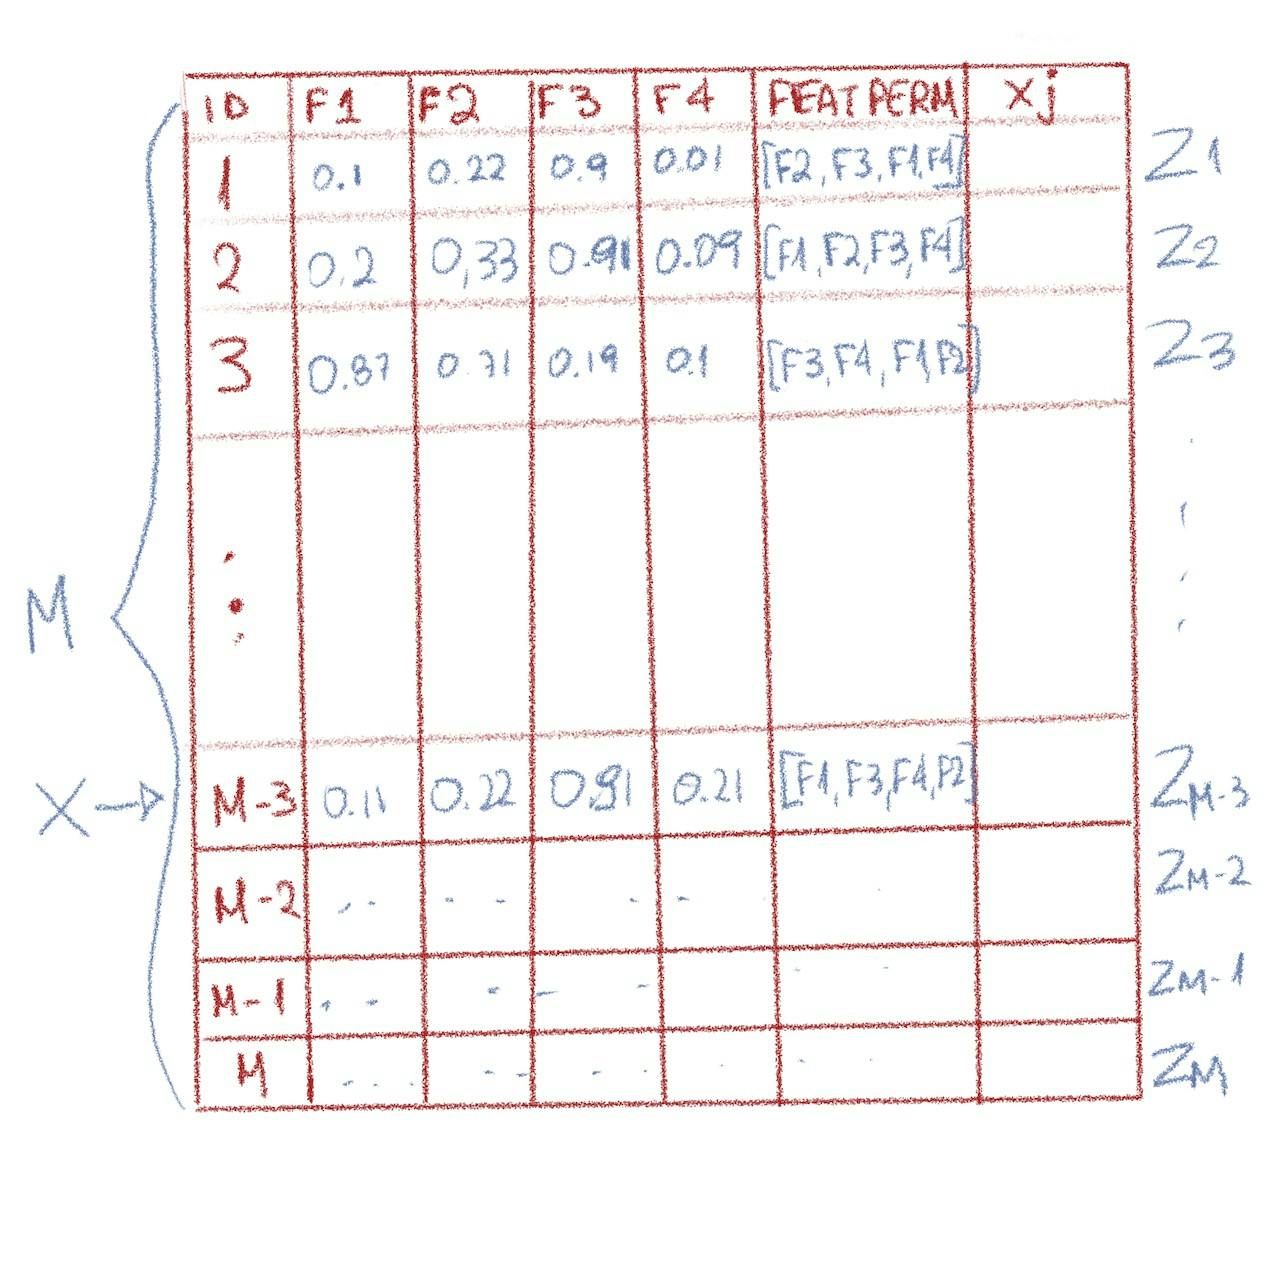 Example of the initial dataframe with a feature permutations column (created by Author)